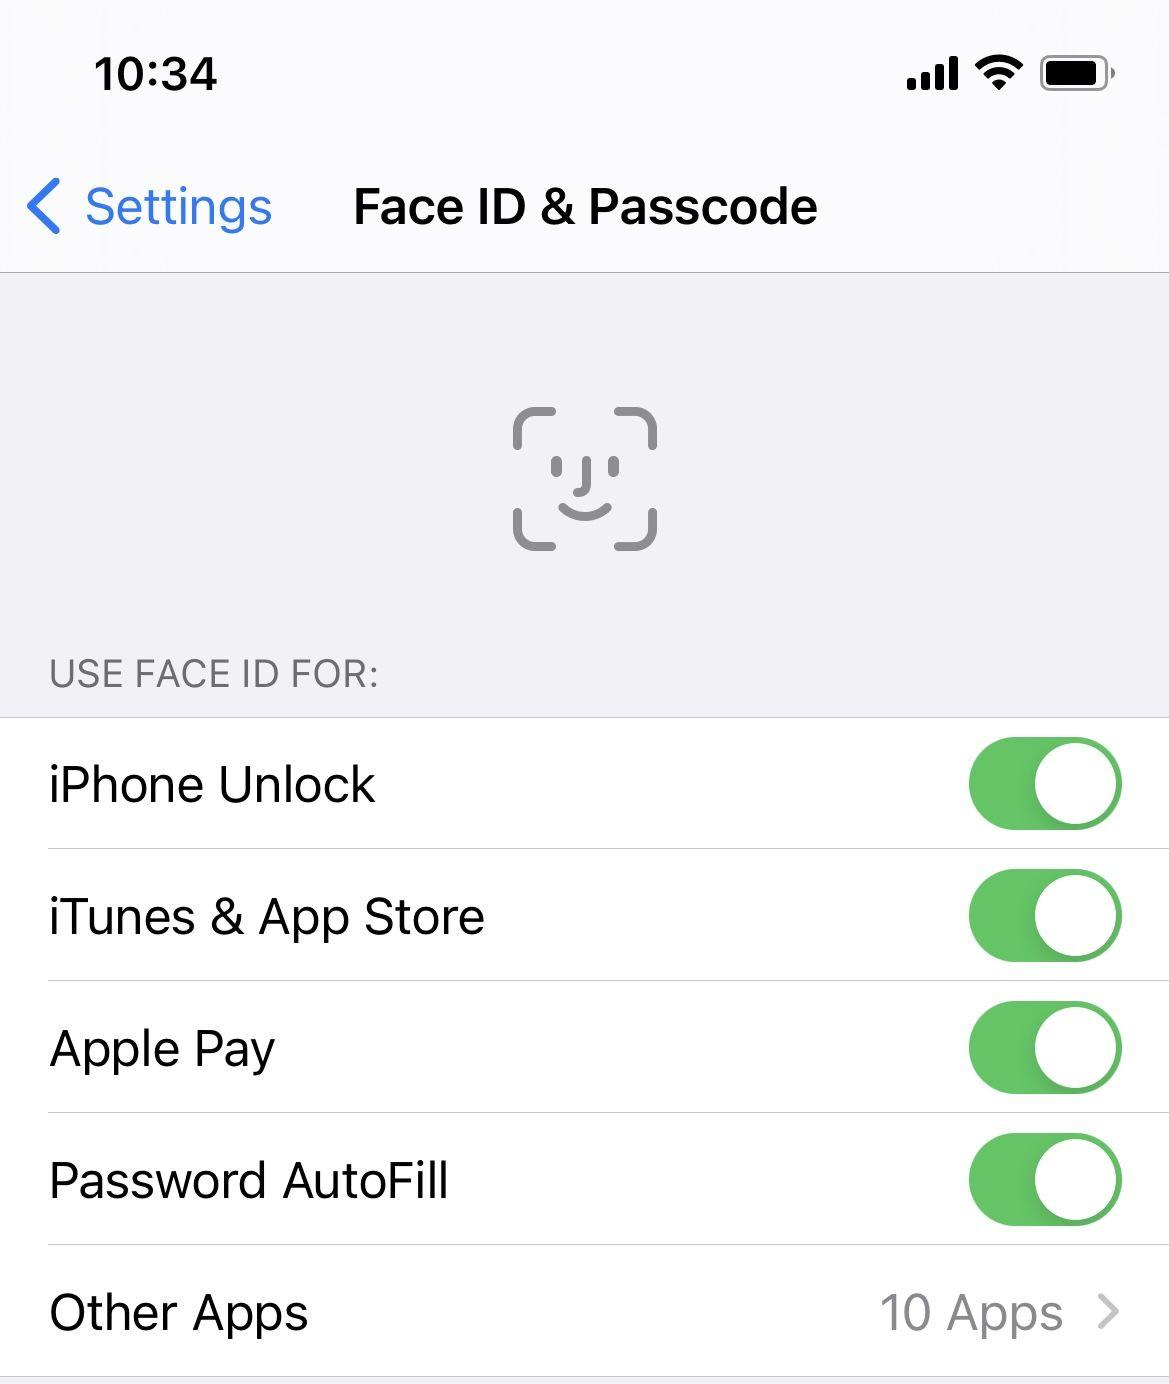 How to use Face ID to unlock iPhone while wearing a face mask